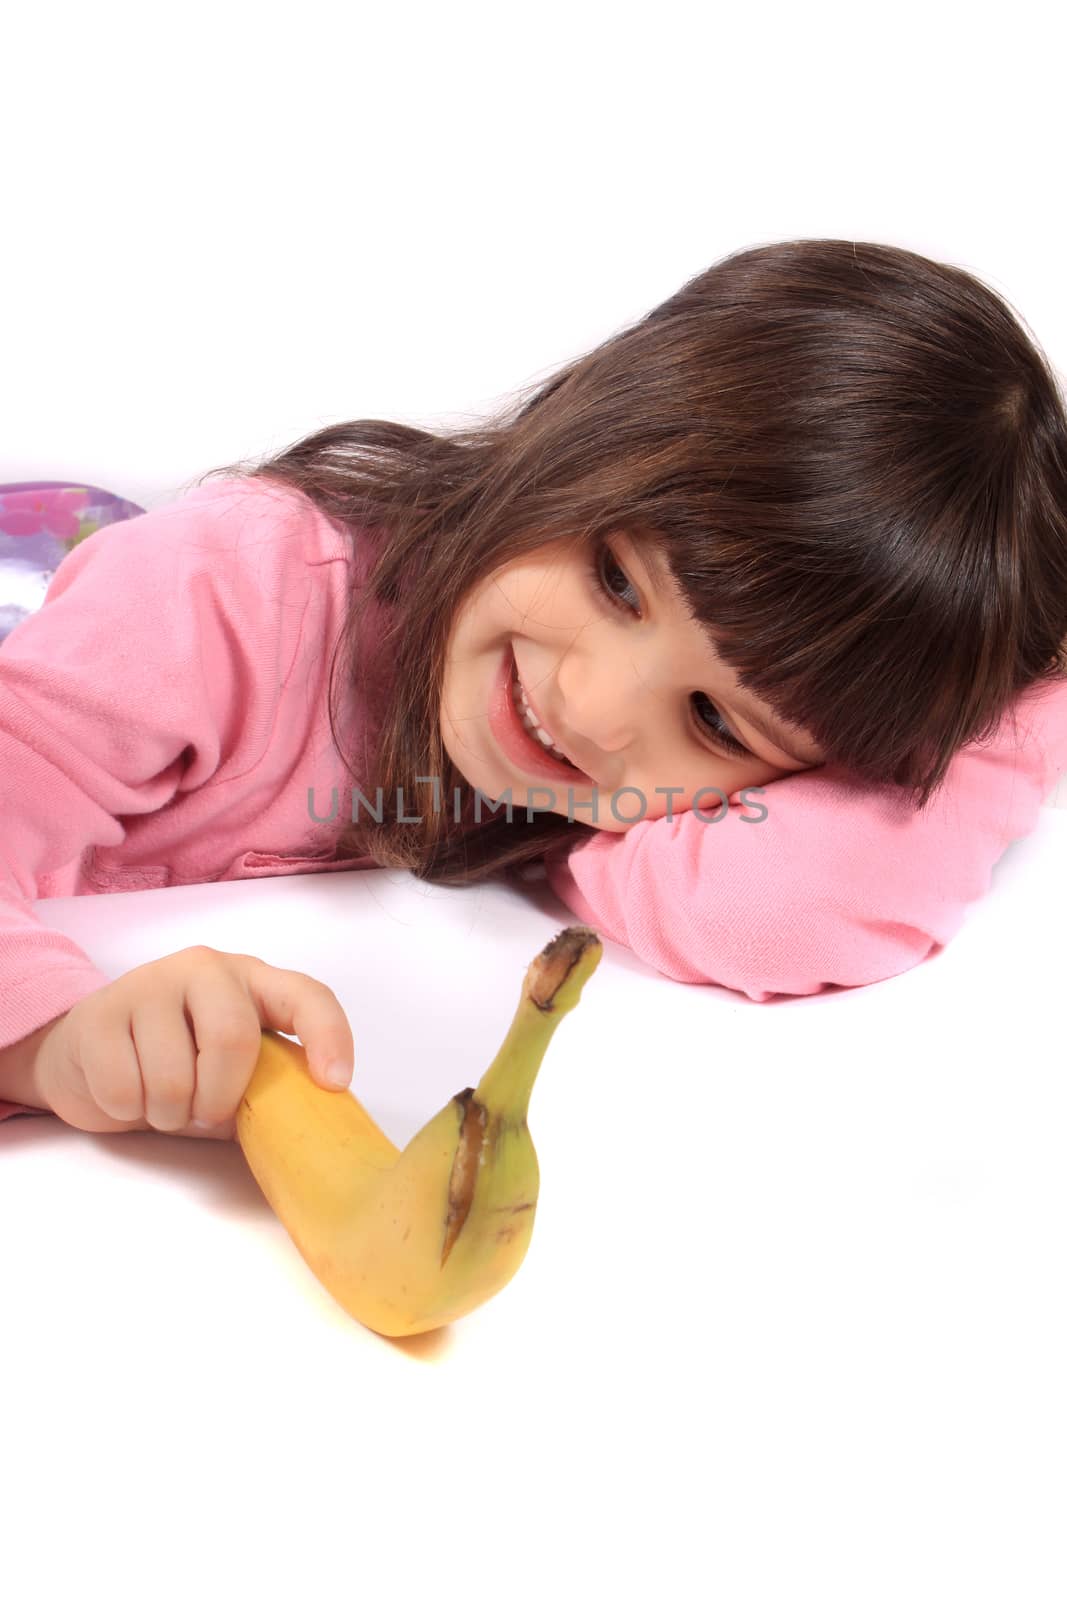 Young little girl laying on white background holding a banana and smiling